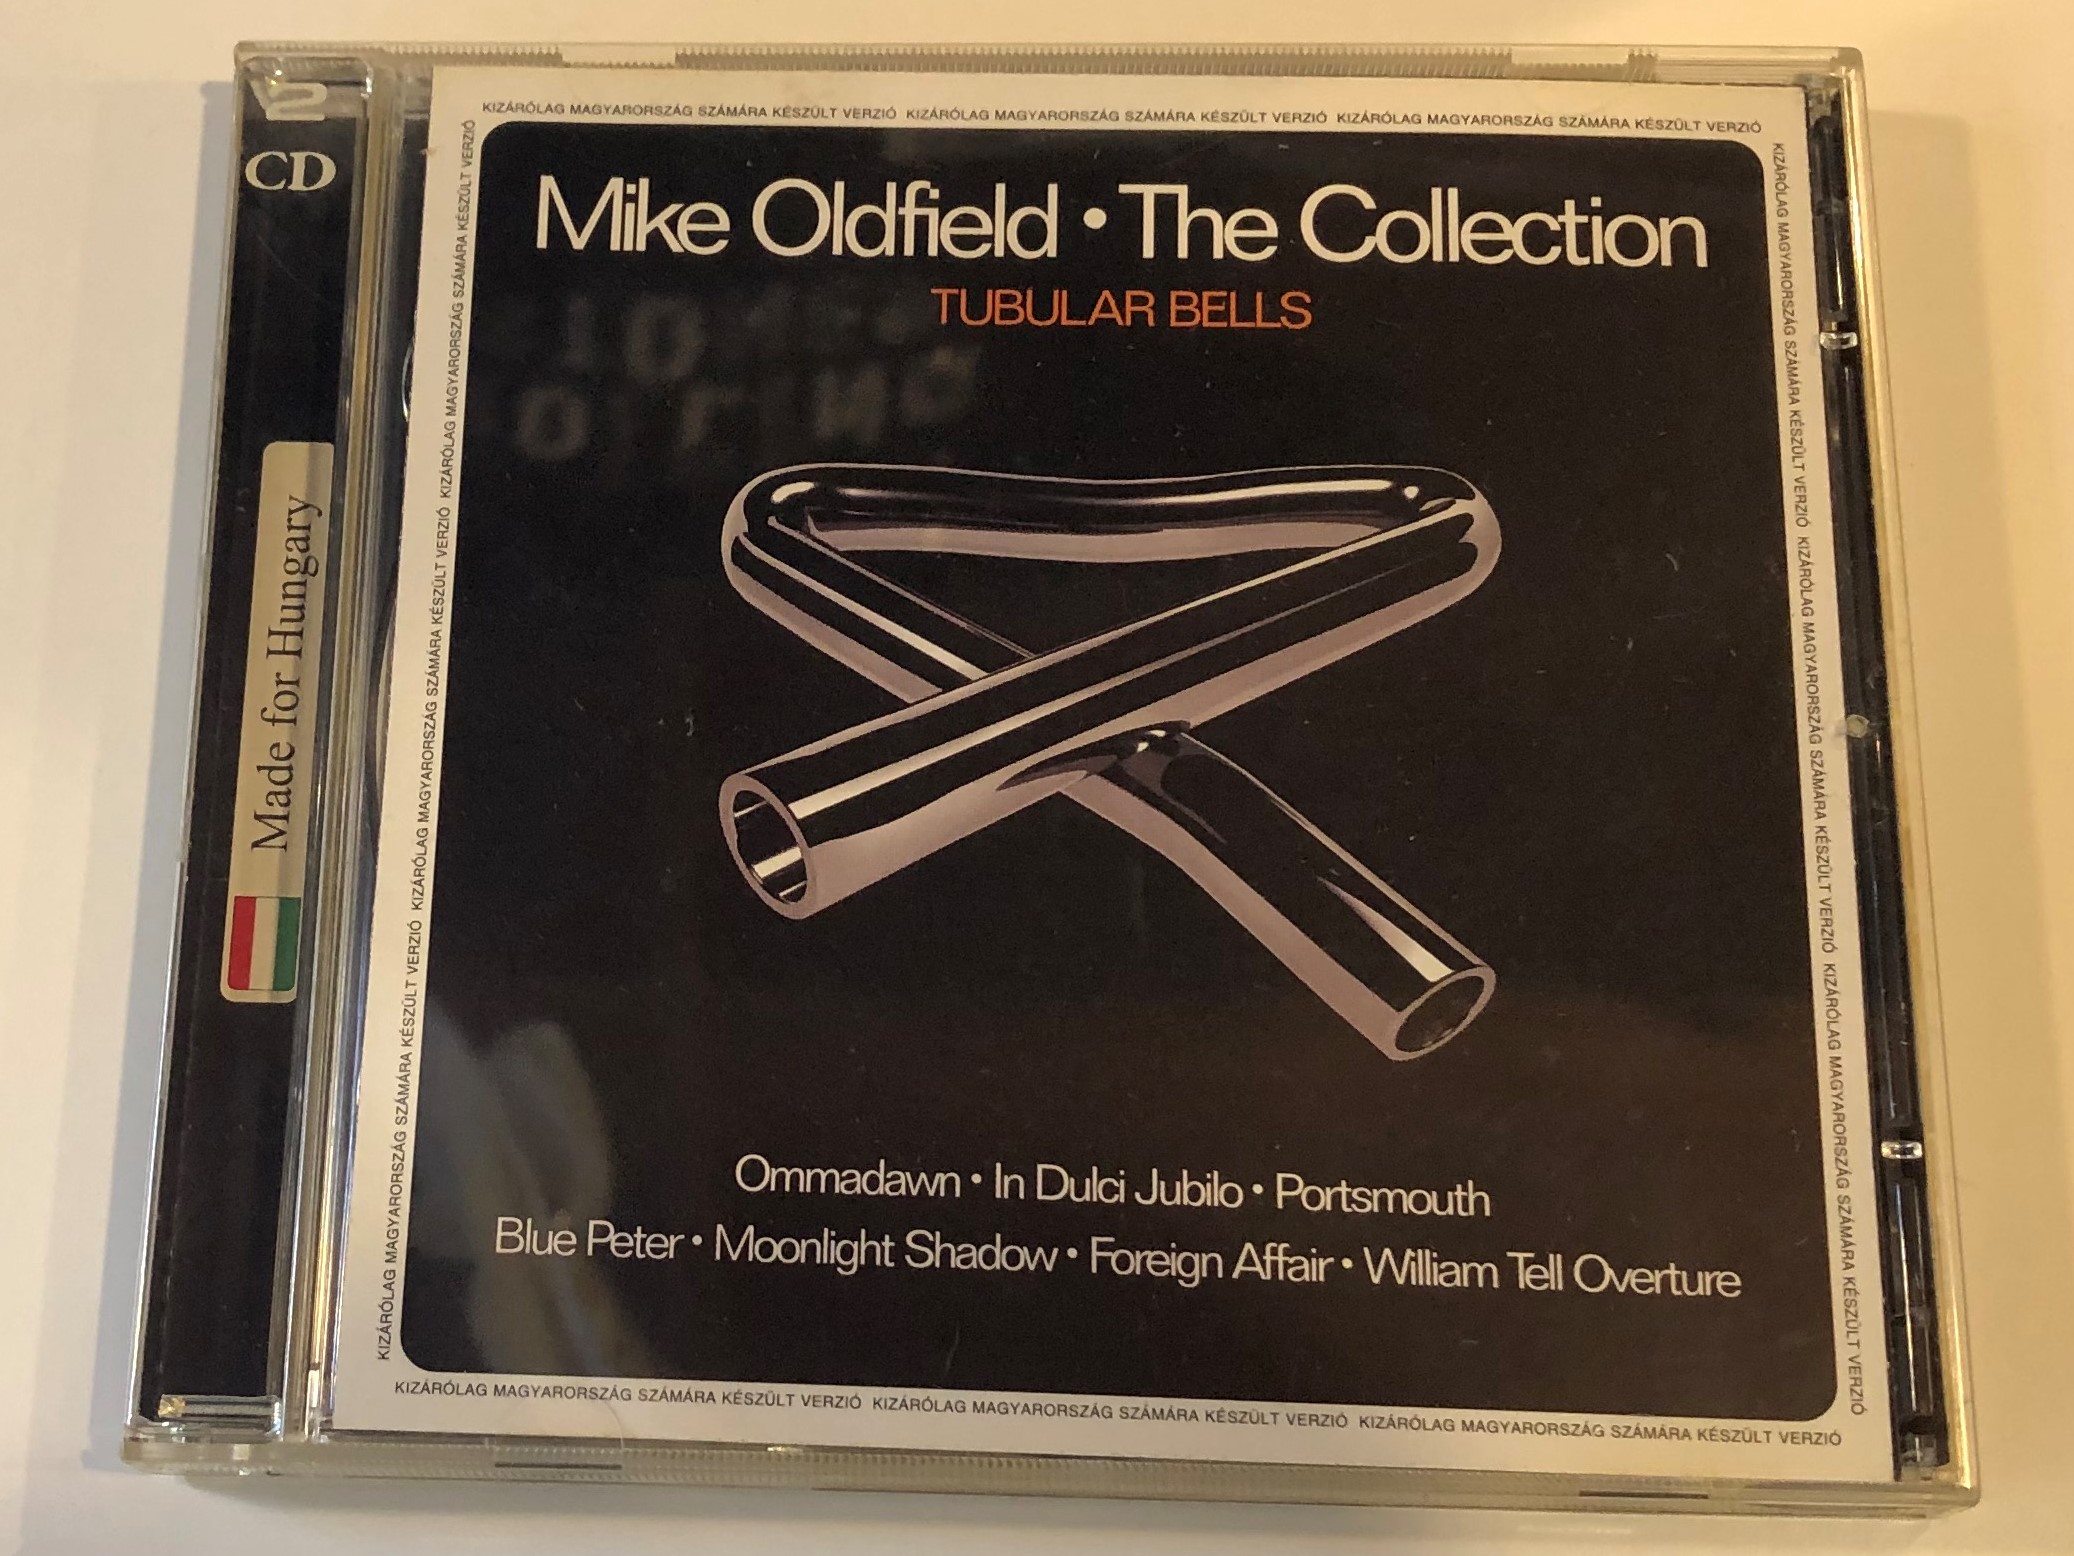 mike-oldfield-the-collection-tubular-bells-ommadawn-in-dulci-jubilo-portsmouth-blue-peter-moonlight-shadow-foreign-affair-william-tell-overture-made-for-hungary-mercury-2x-audio-cd-1-.jpg